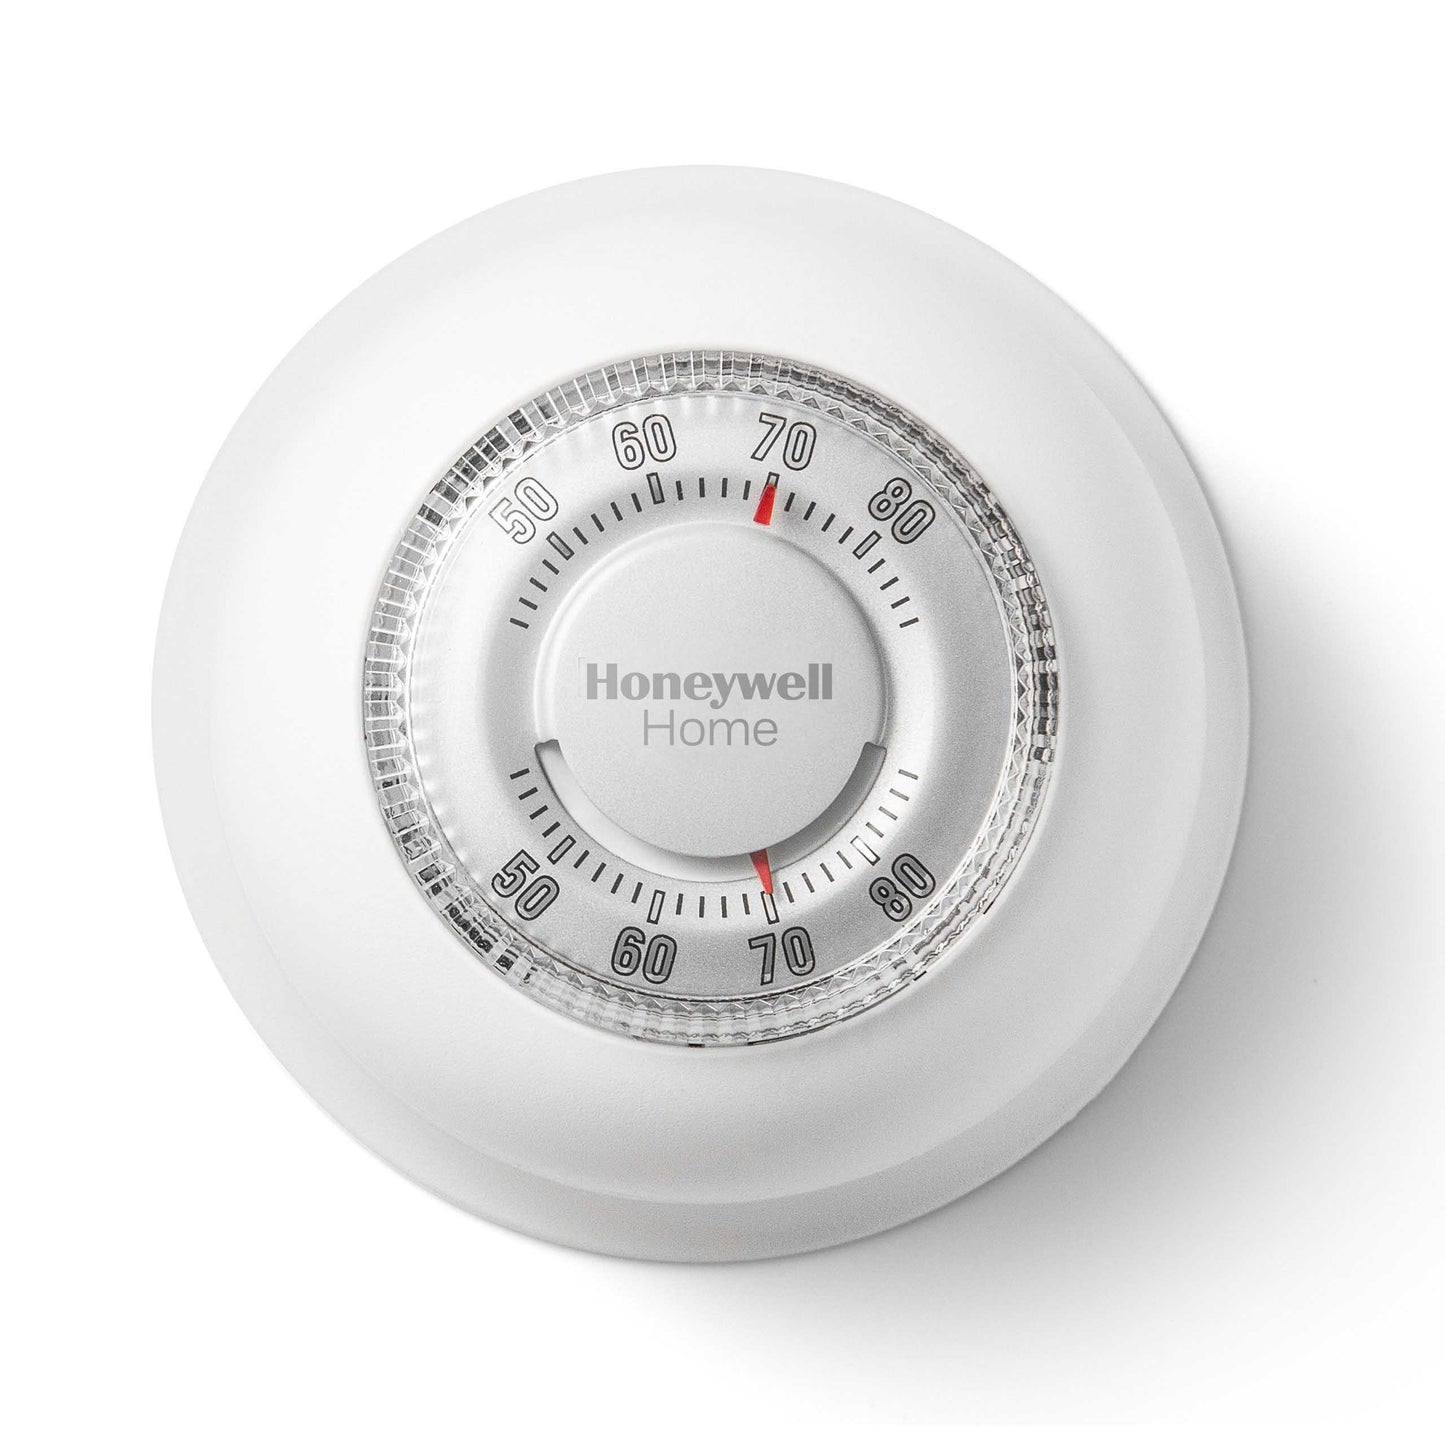 Honeywell T87K1007 - The Round Manual Thermostat with Fahrenheit Plate